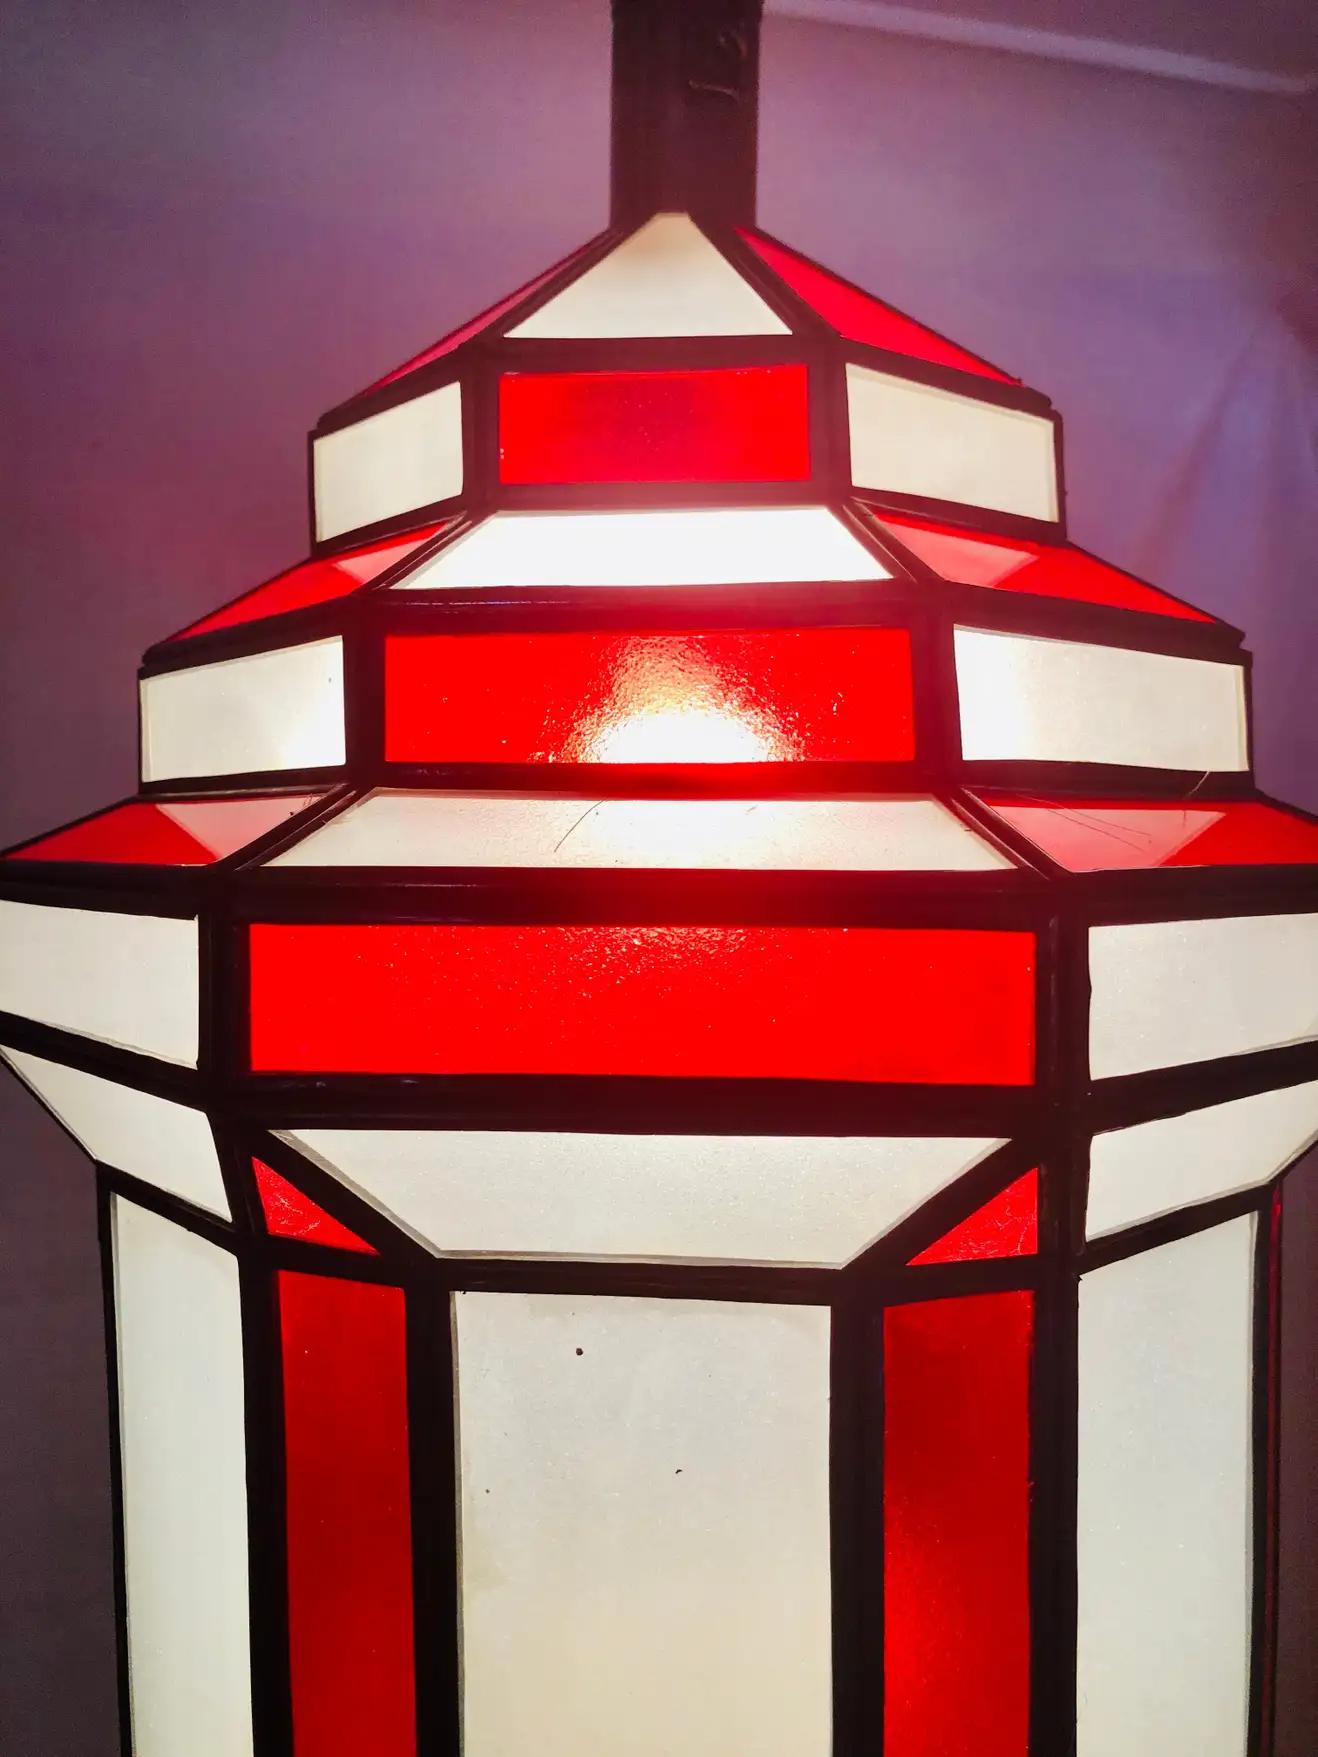 Art Deco style white milk and red glass chandelier, pendant or lantern
A gorgeous handcrafted red and while pendant, having individual panes.The Art Deco hanging lantern or ceiling fixture features sandblasted frosted milky white and red glass and